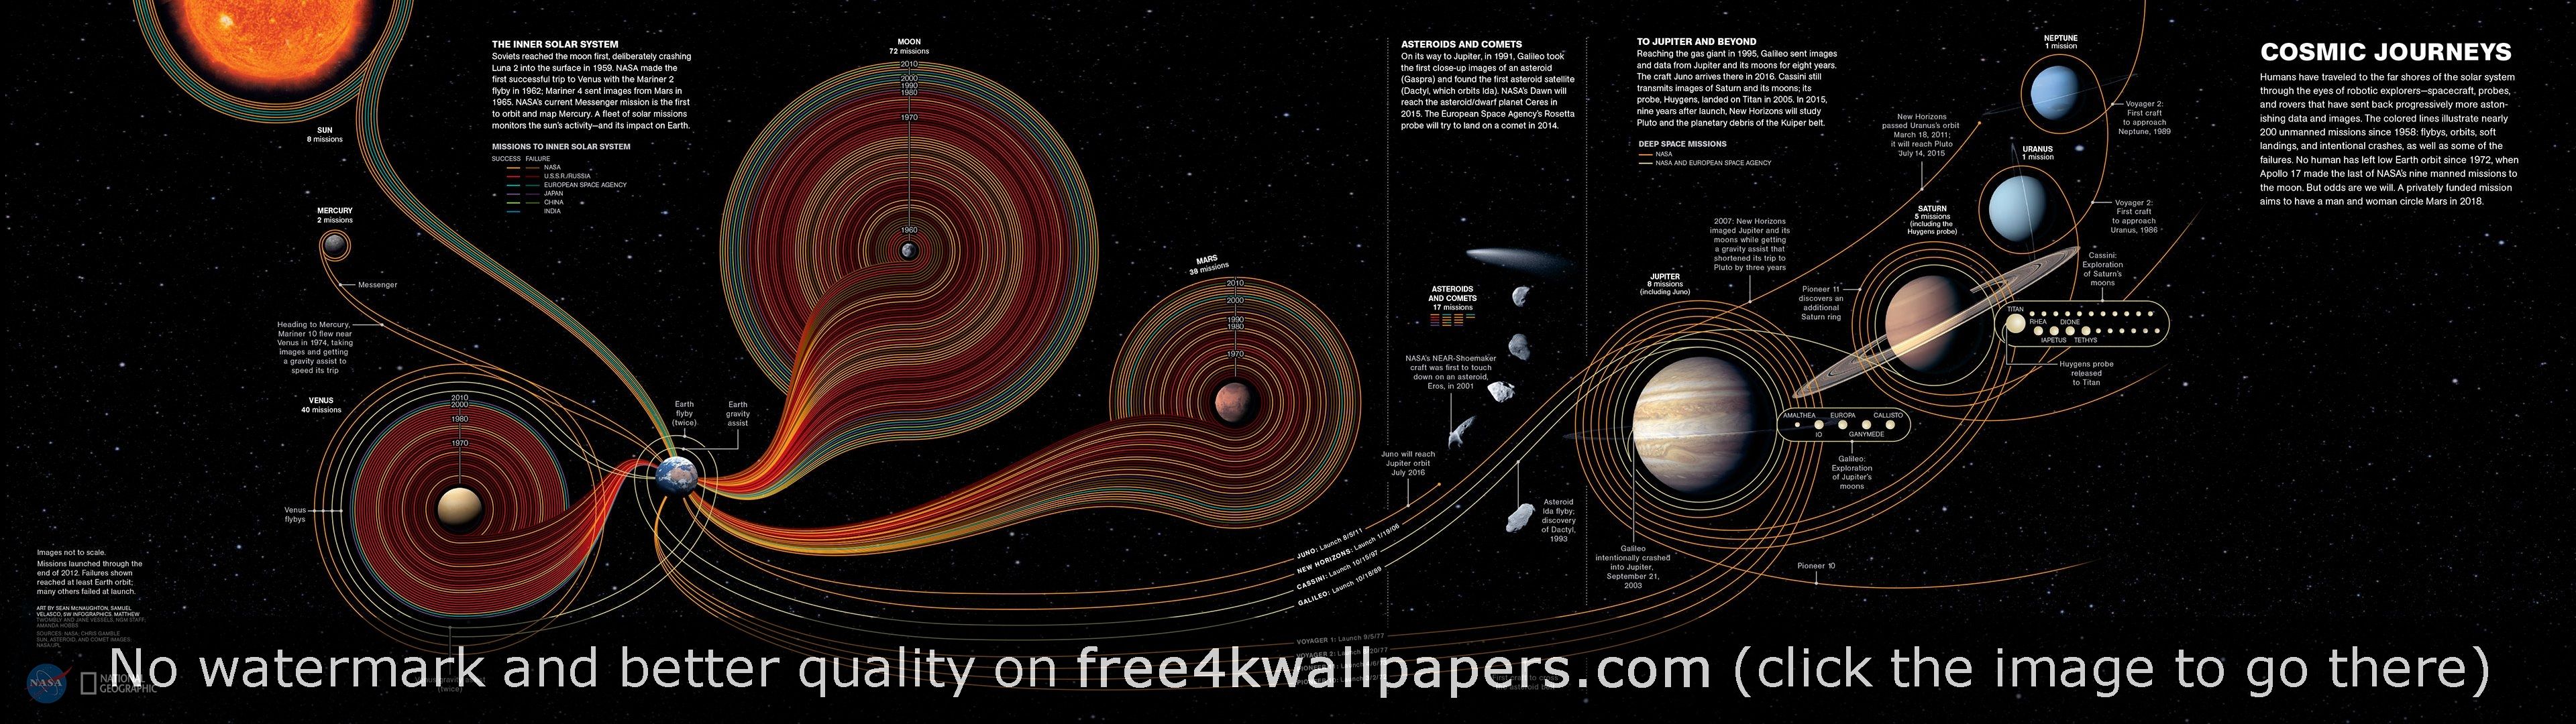 Cosmic journeys dual screen k wallpaper space exploration data visualization space and astronomy